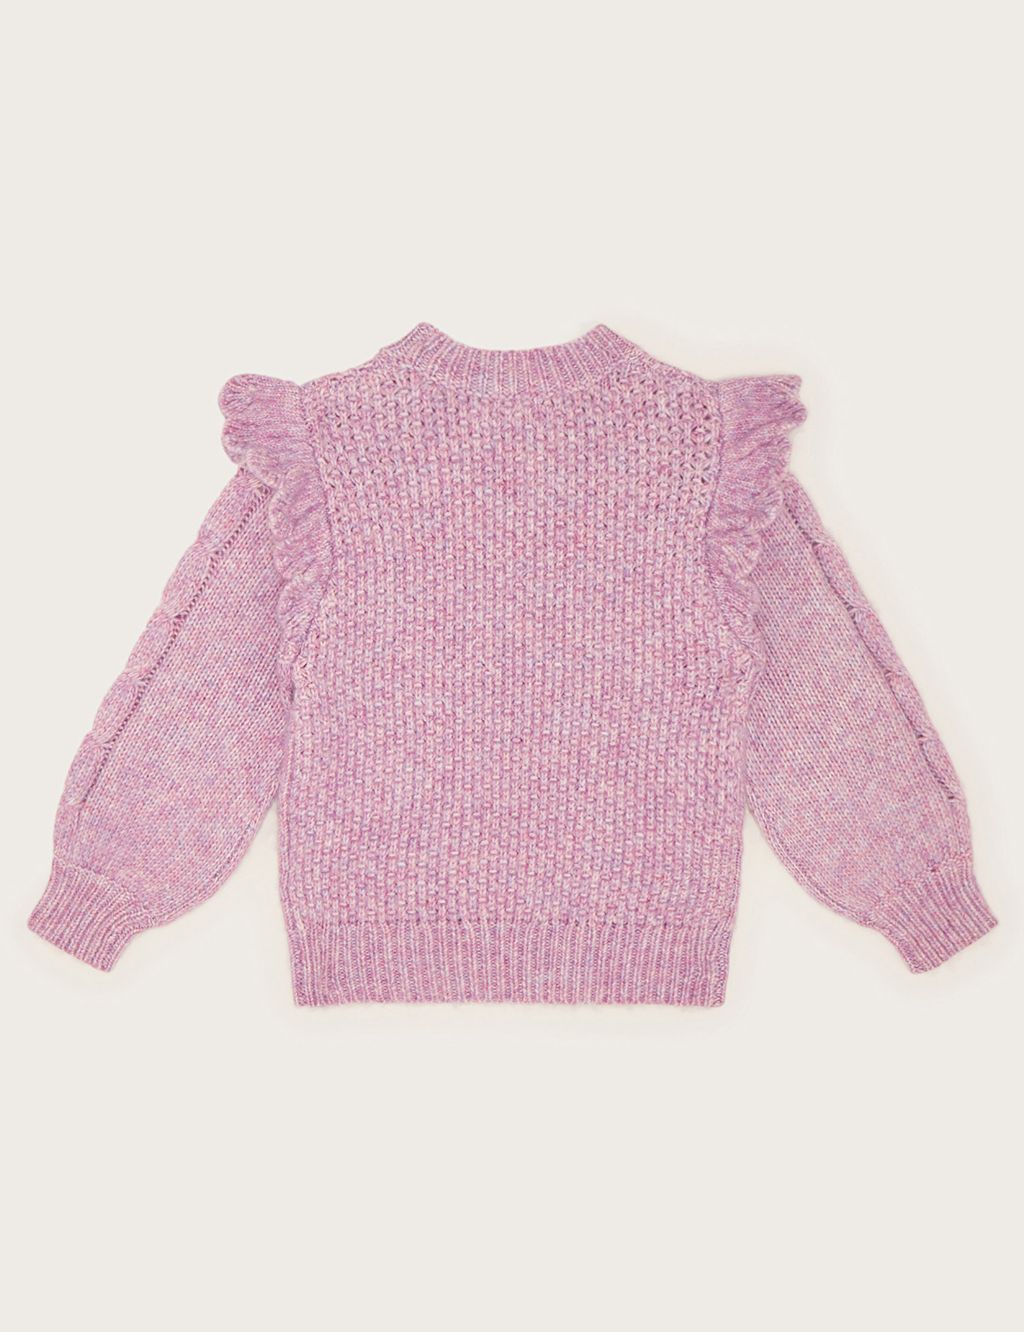 Knitted Frill Jumper (3-13 Yrs) image 2